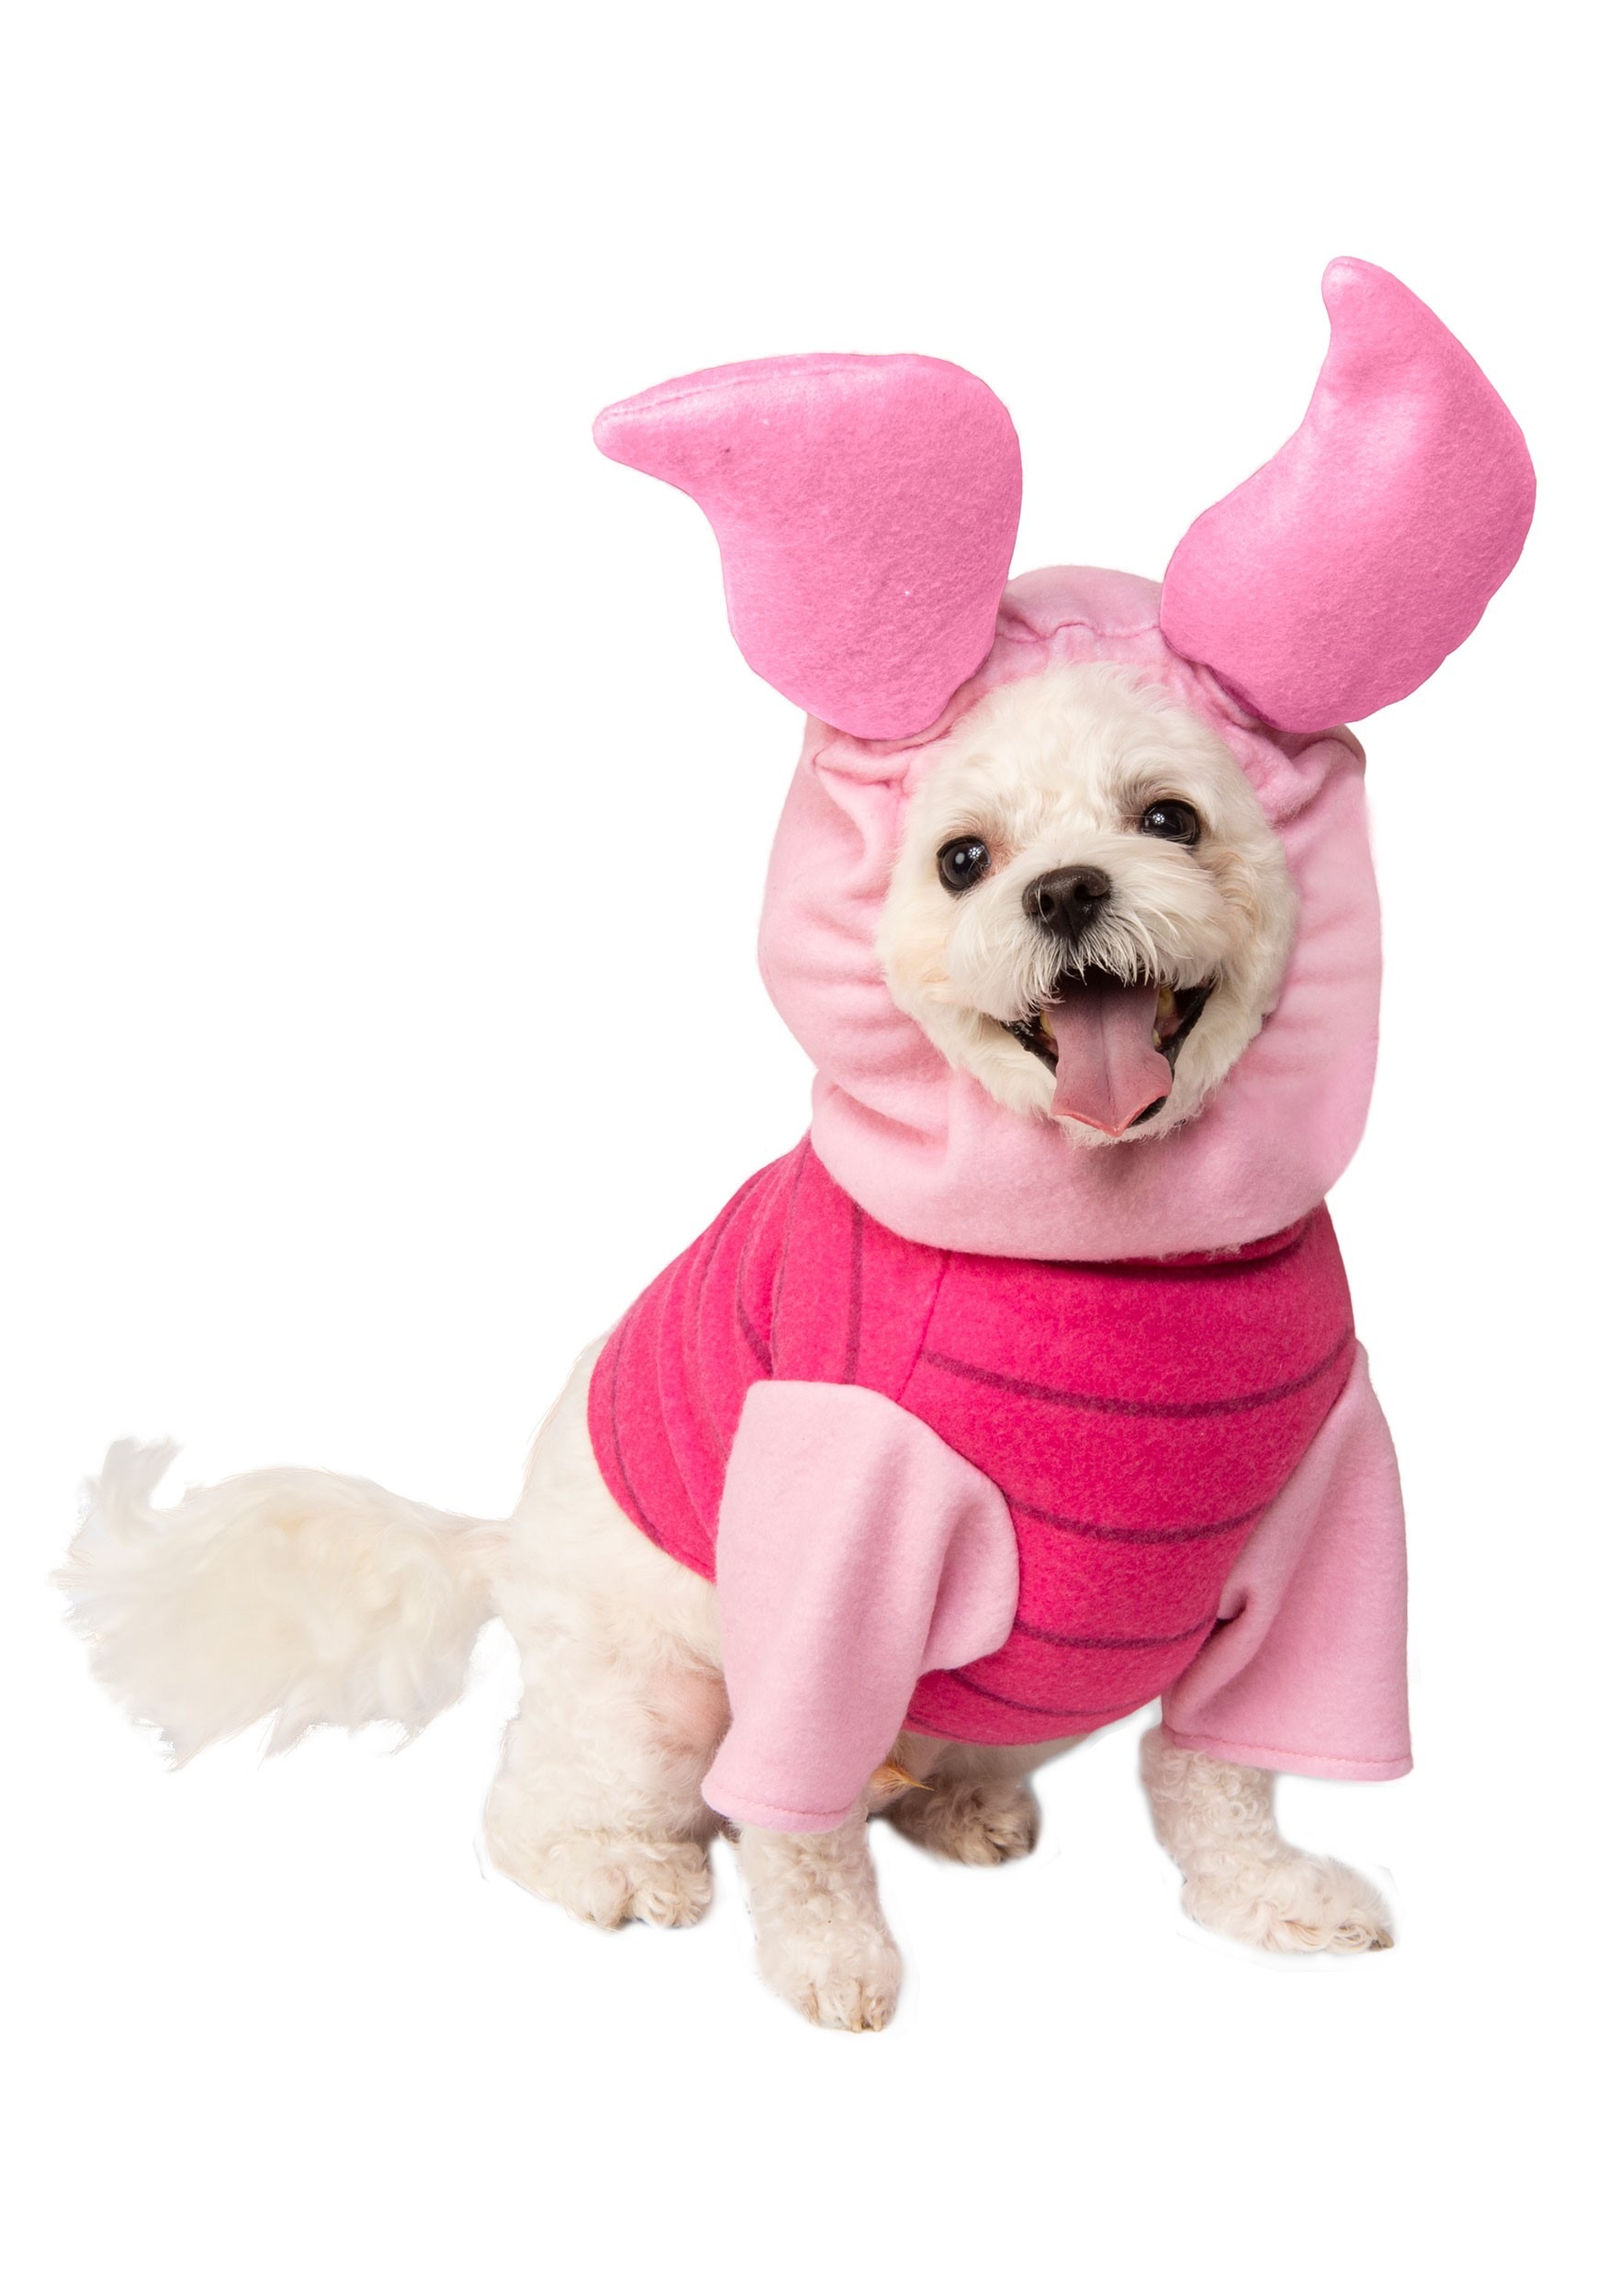 Piglet from Winnie the Pooh Pet Costume